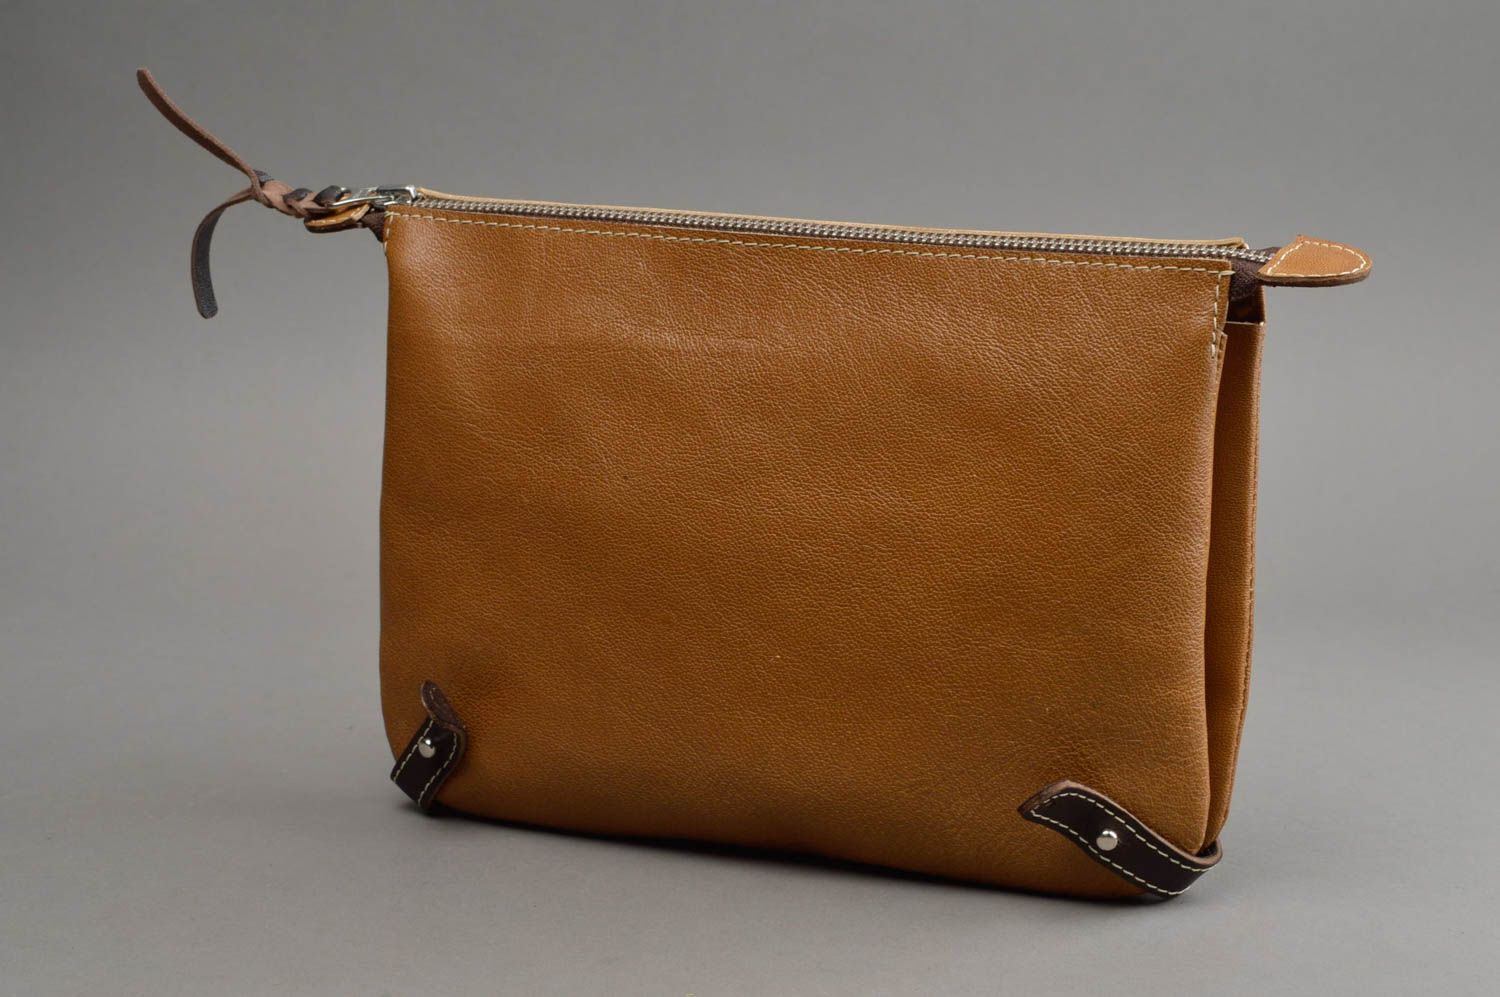 Handmade leather clutch cute bag in casual style beautiful accessories photo 2